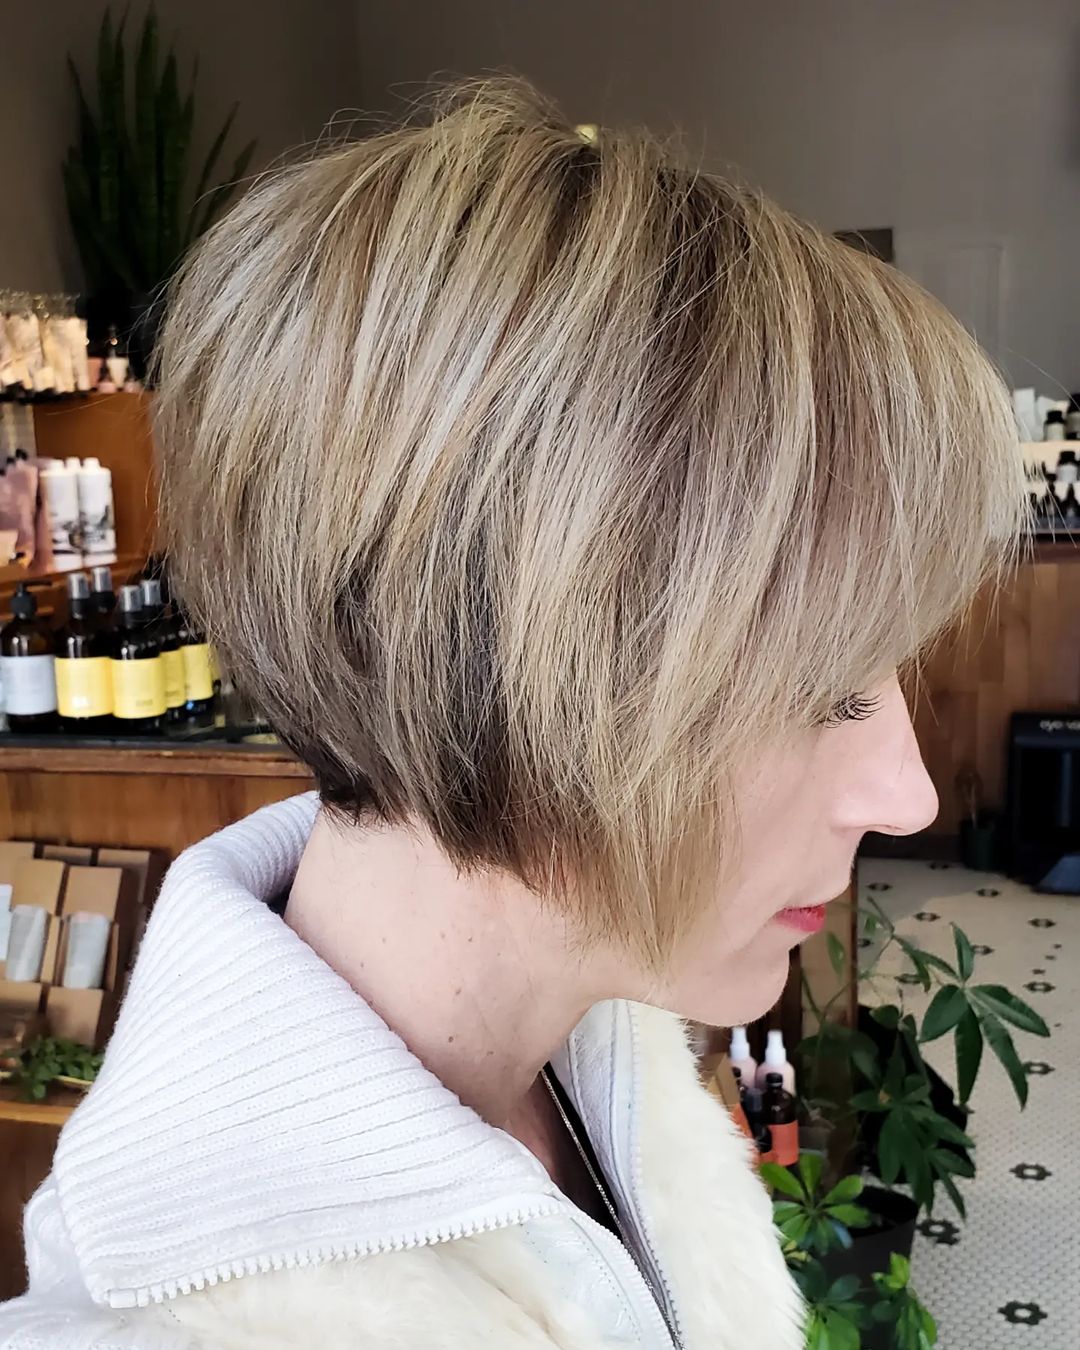 Stacked Bob 35 Long stacked bob | Medium length stacked bob | Pictures of stacked bob haircuts front and back Stacked Bob Hairstyles for Women